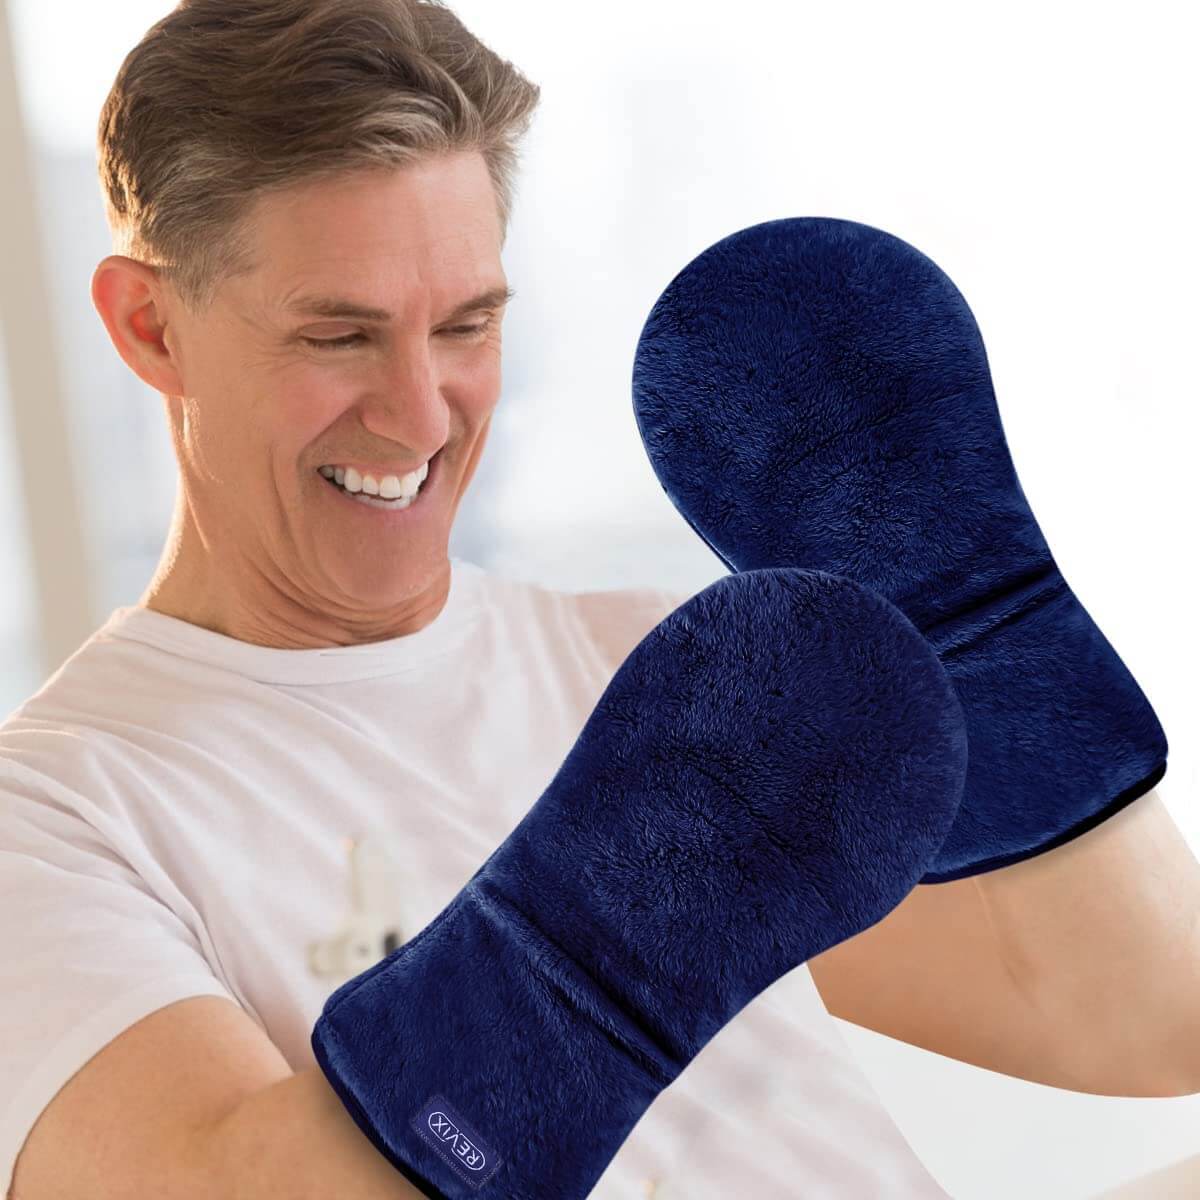 Buy navy-blue REVIX Microwavable Heating Mittens for Hand and Fingers to Relieve Arthritis Pain